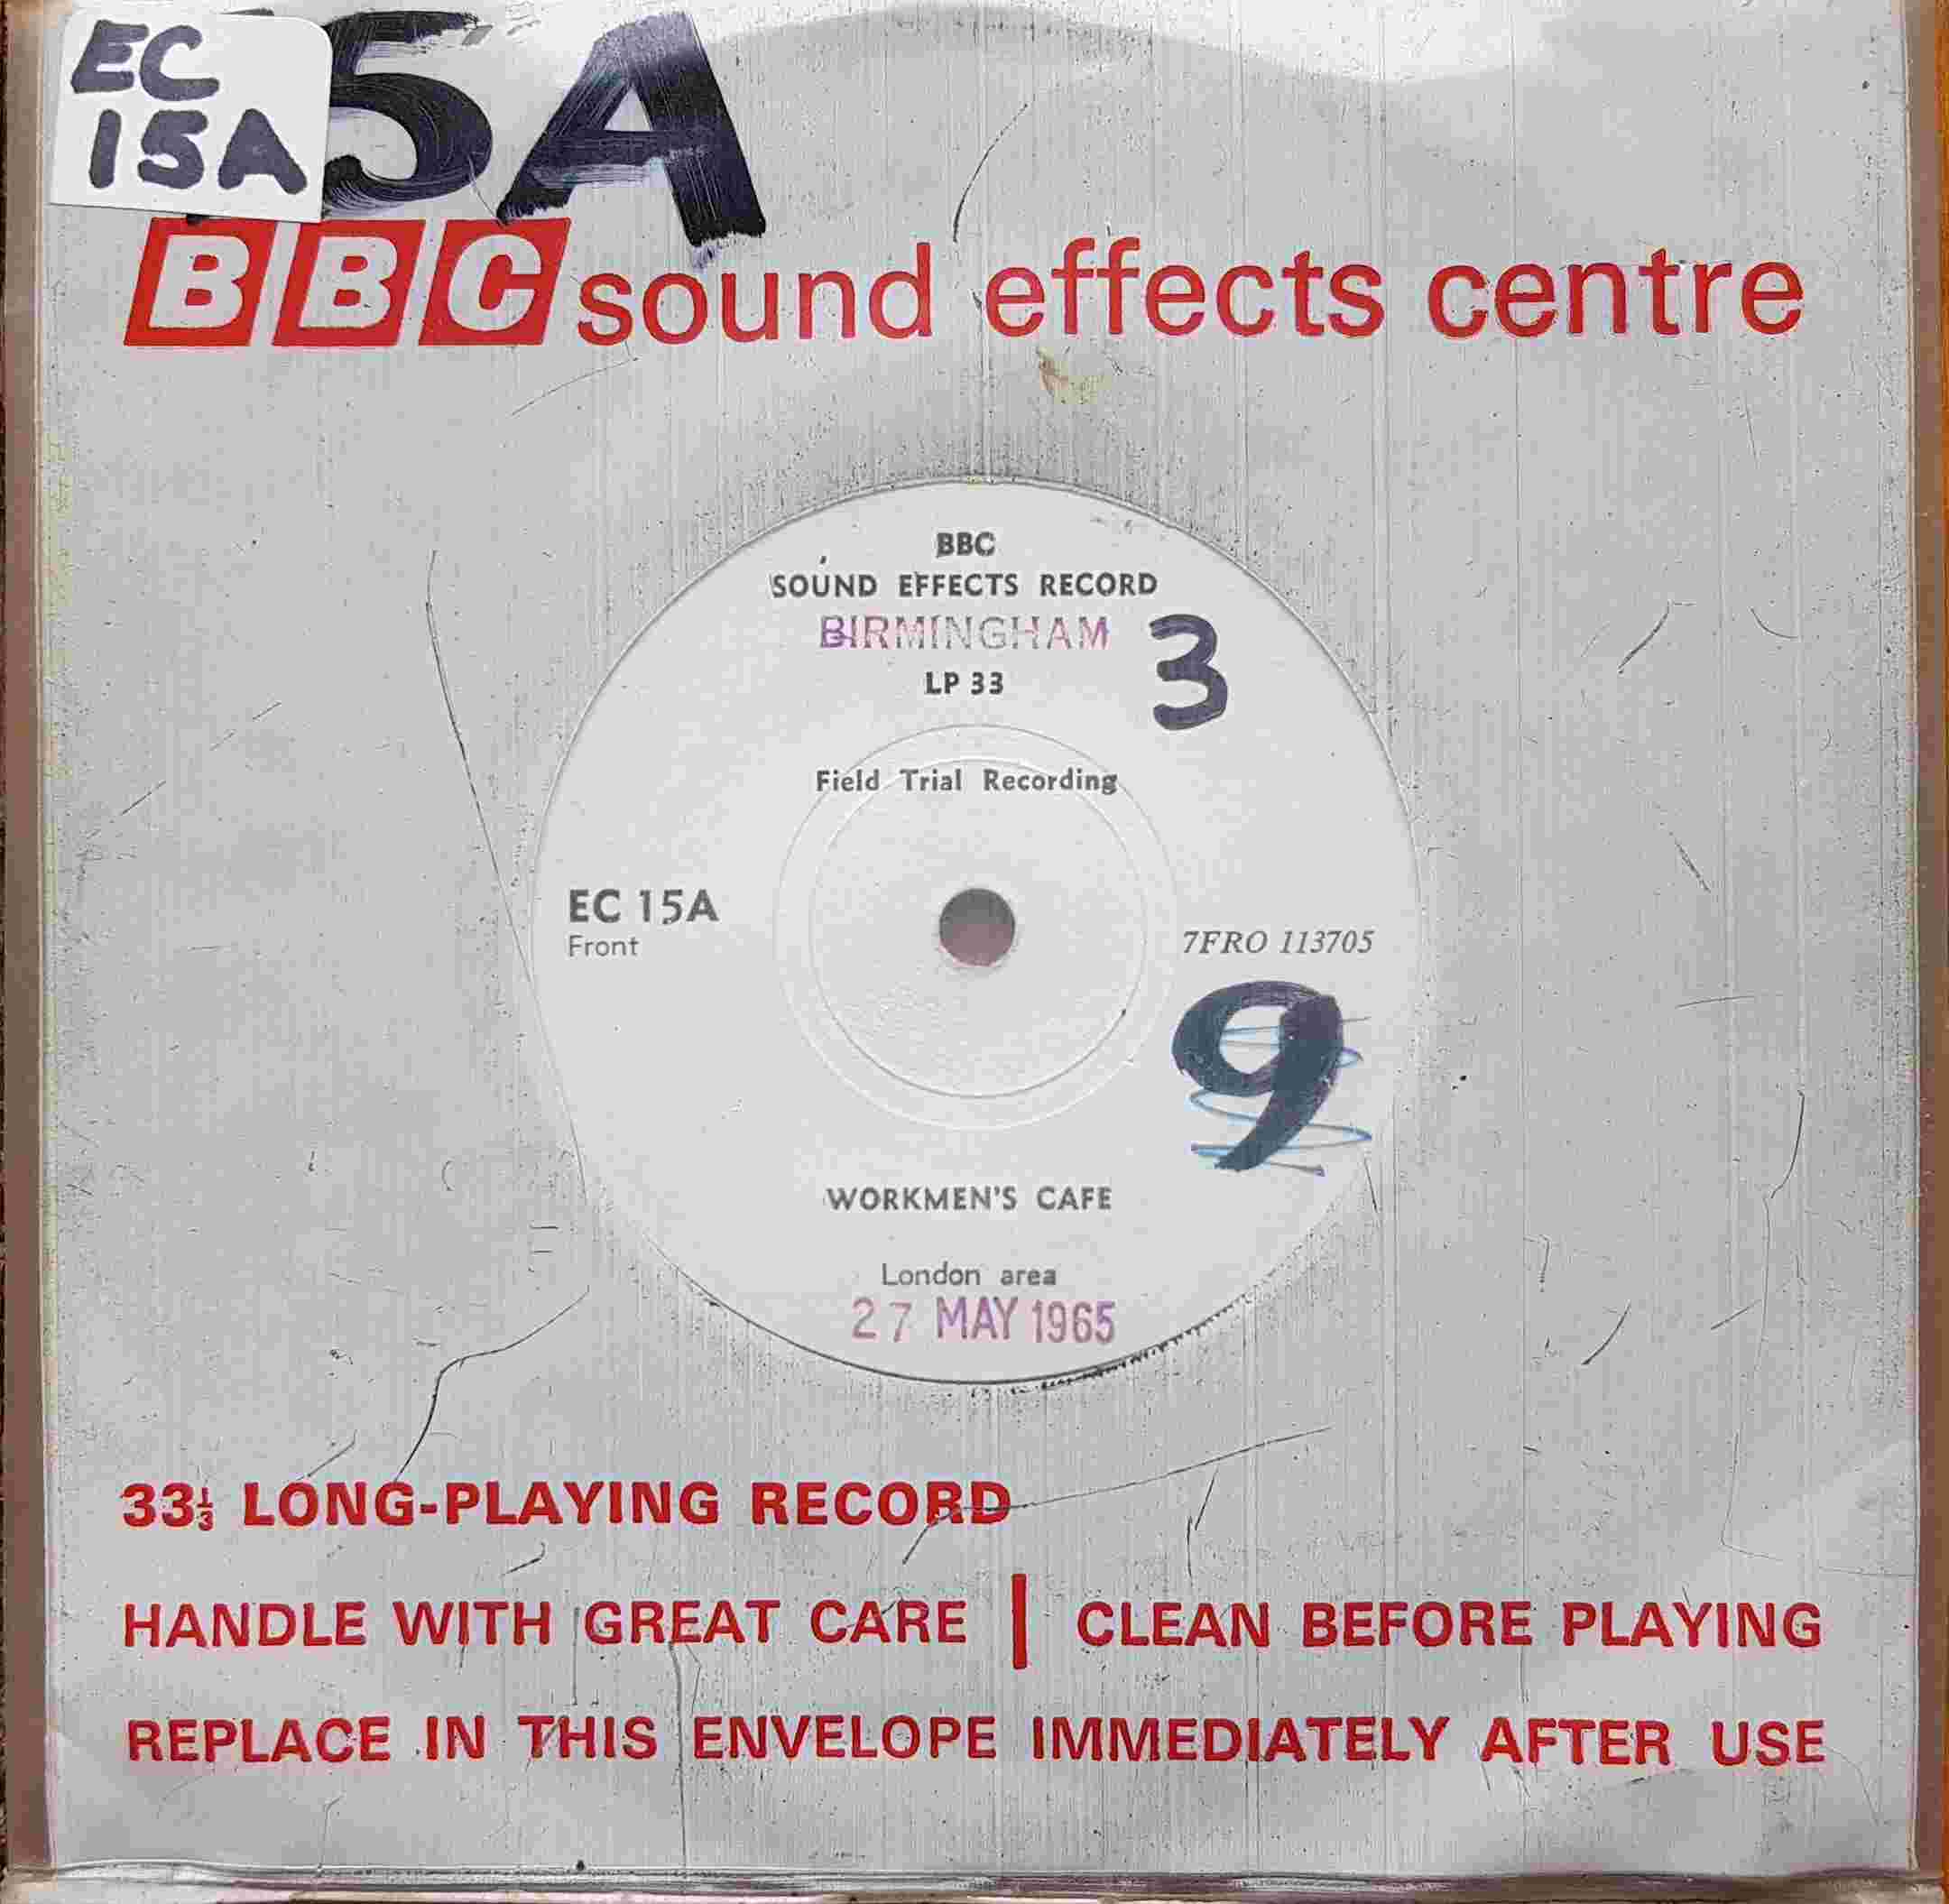 Picture of EC 15A Workmen's cafe by artist Not registered from the BBC records and Tapes library